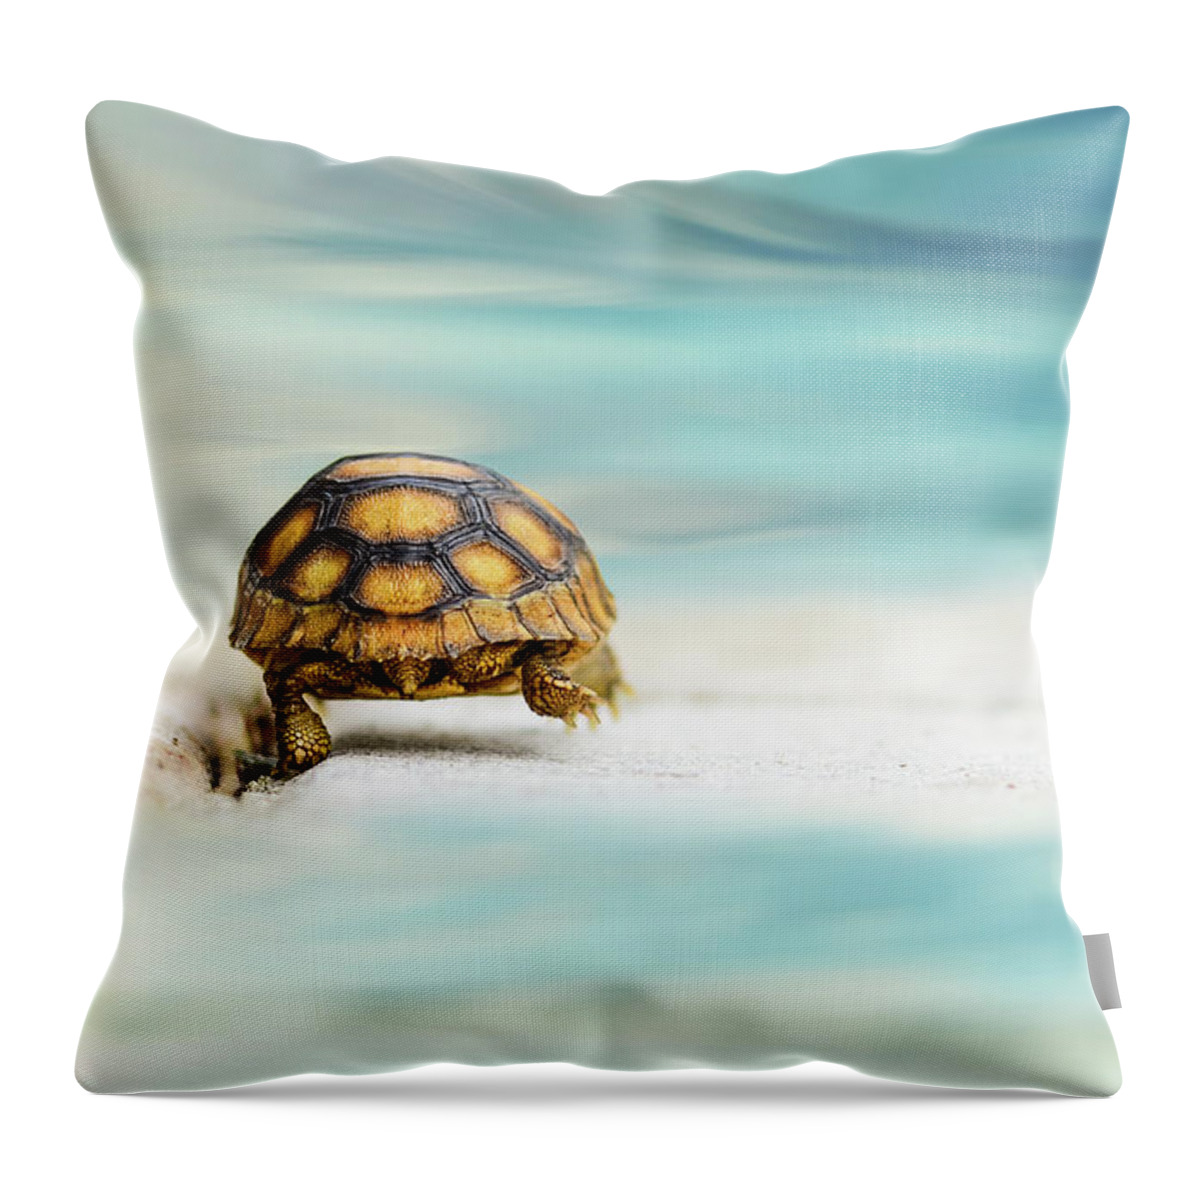 Animal Throw Pillow featuring the photograph Big Big World by Laura Fasulo